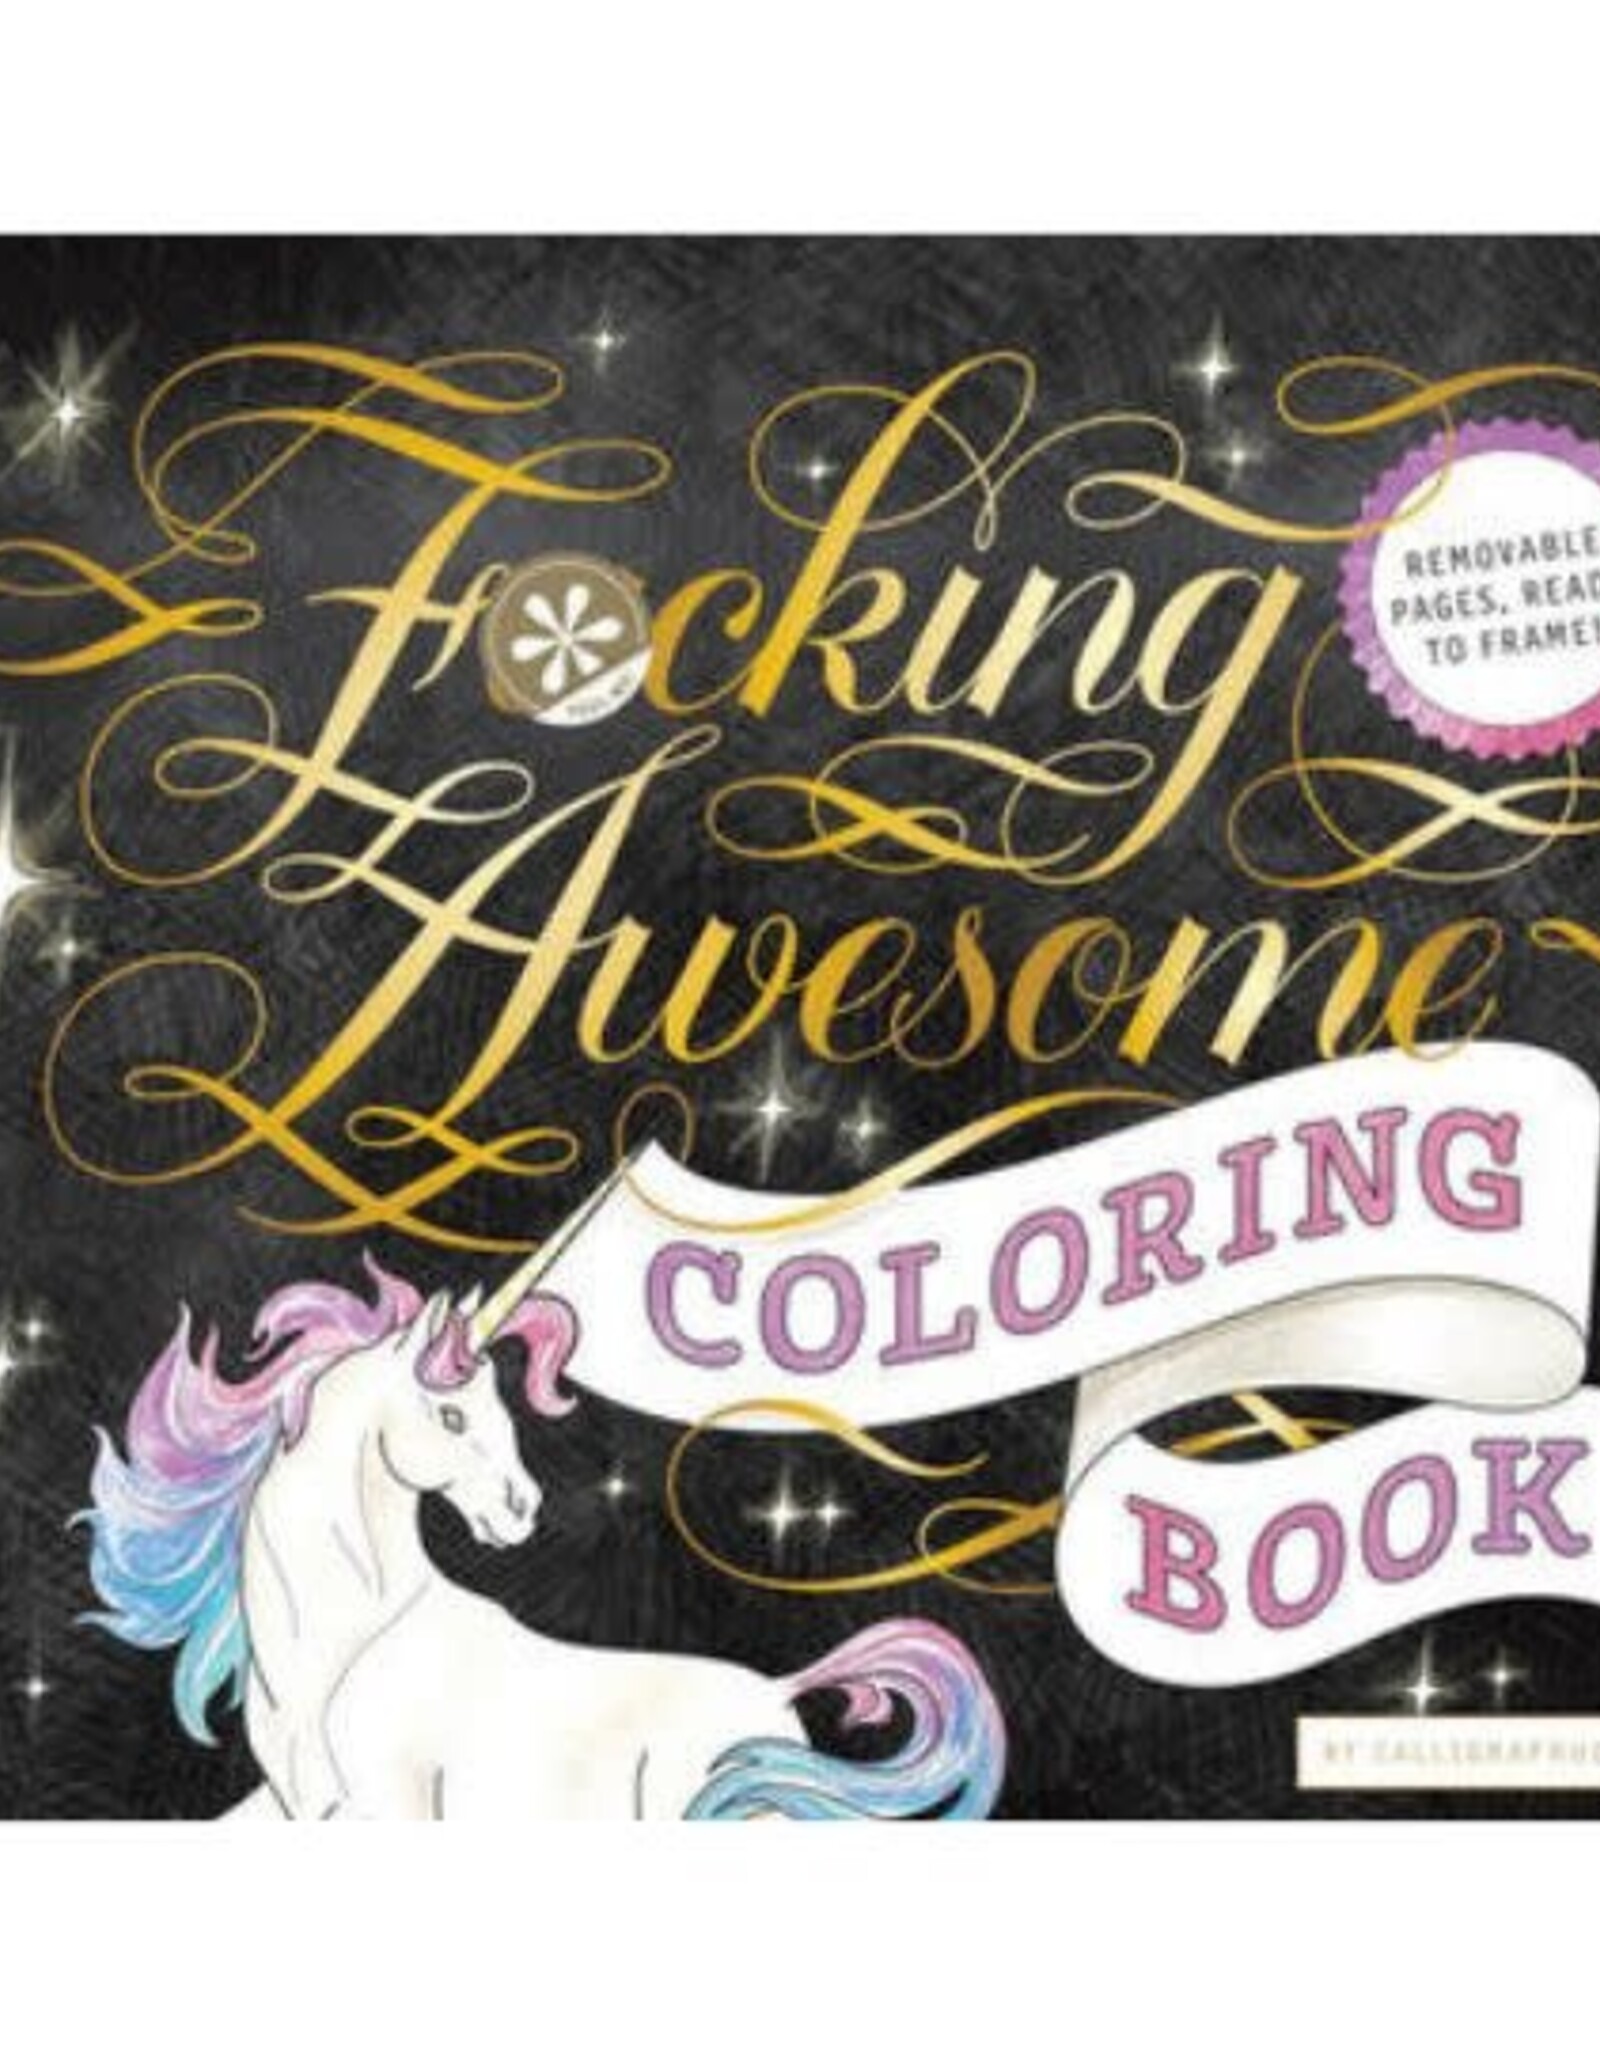 Calligraphuck Fucking Awesome Coloring Book by Calligraphuck